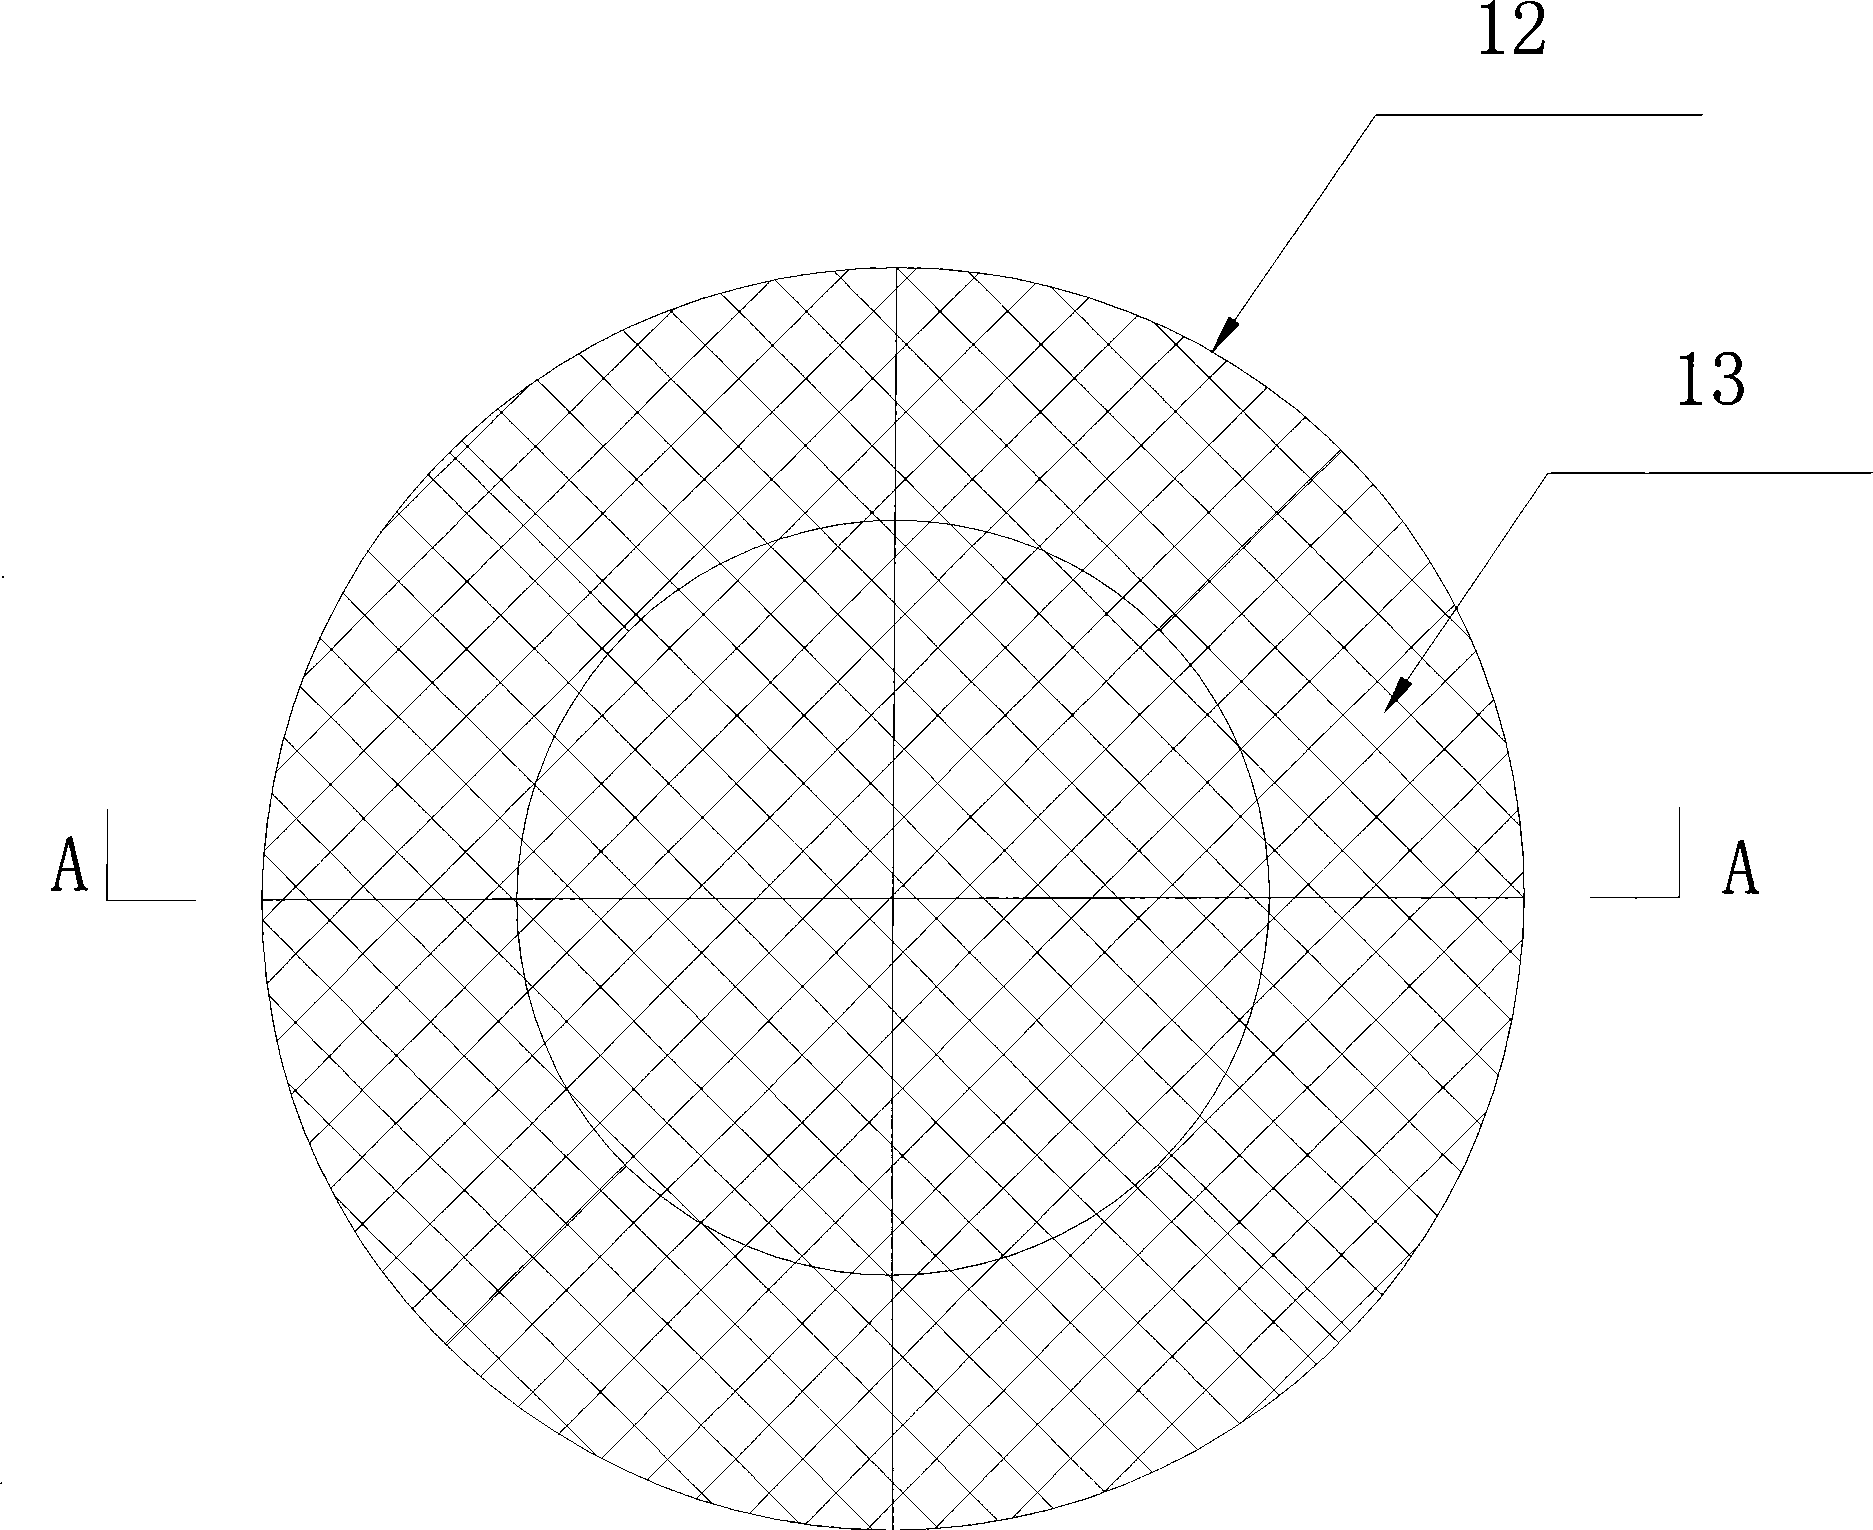 Moveable bottom-raft type cultivation system